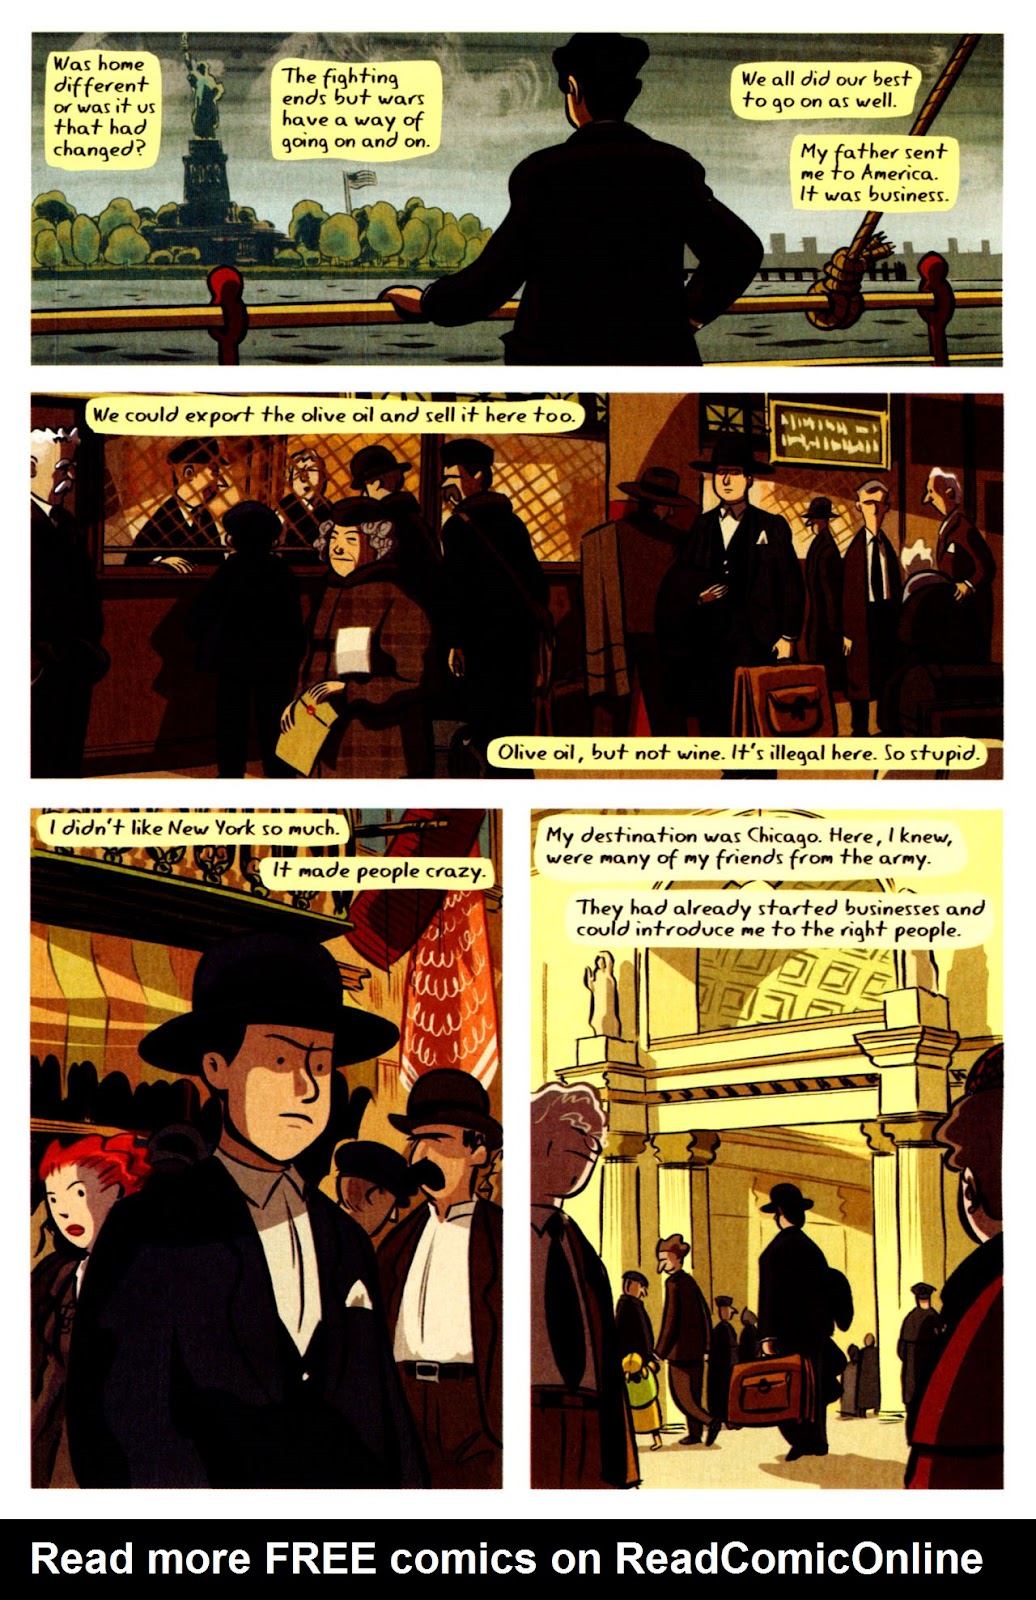 Parade (with fireworks) issue 1 - Page 6